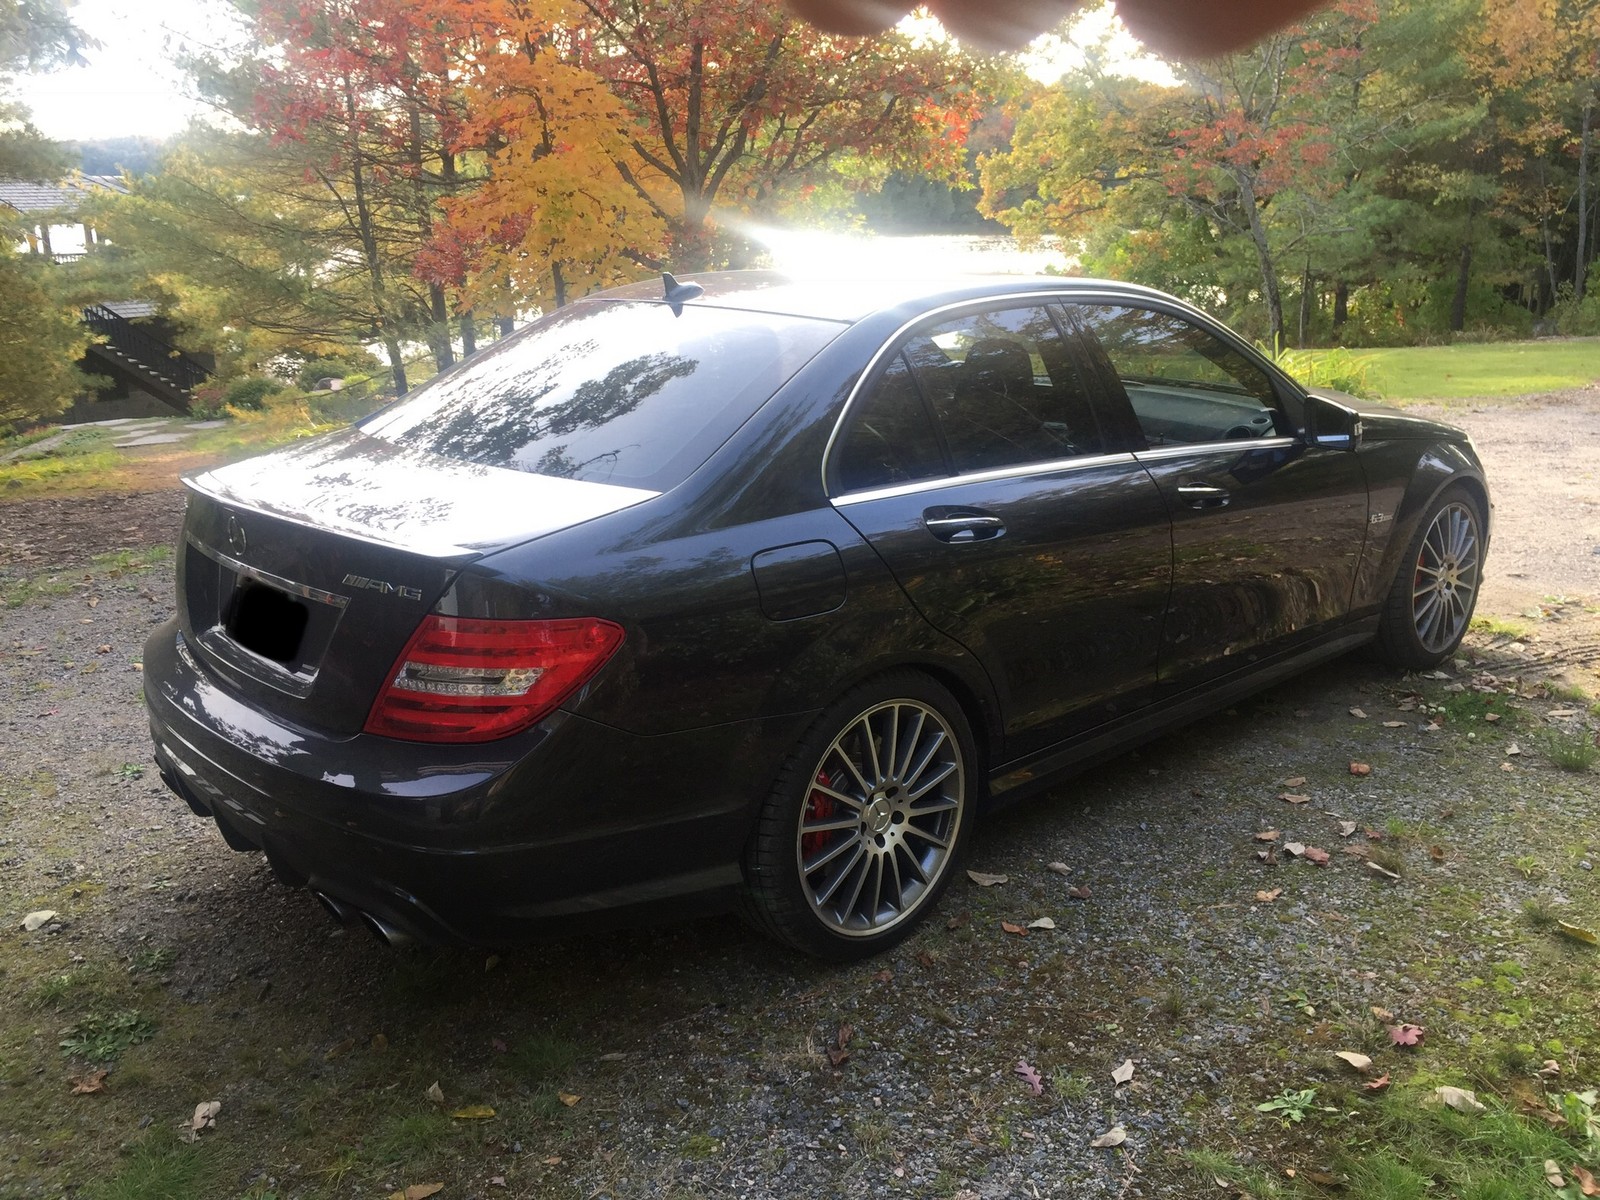 2013 Black Mercedes-Benz C63 AMG P31 Development package - Stock picture, mods, upgrades